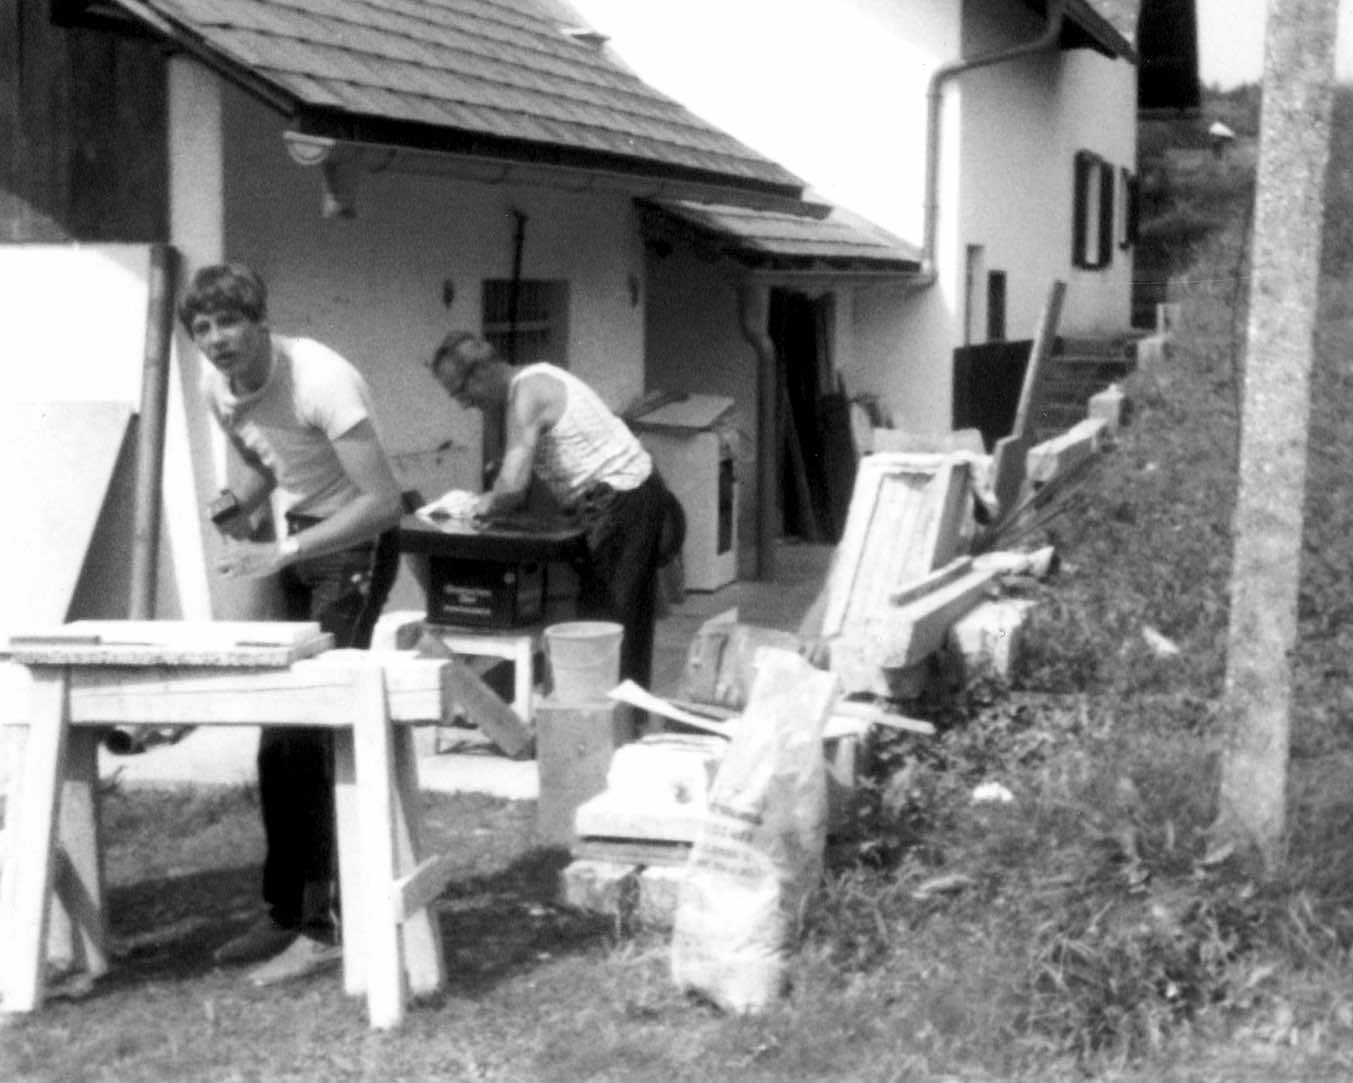 Walter Pölzl engraving letters in his home workshop